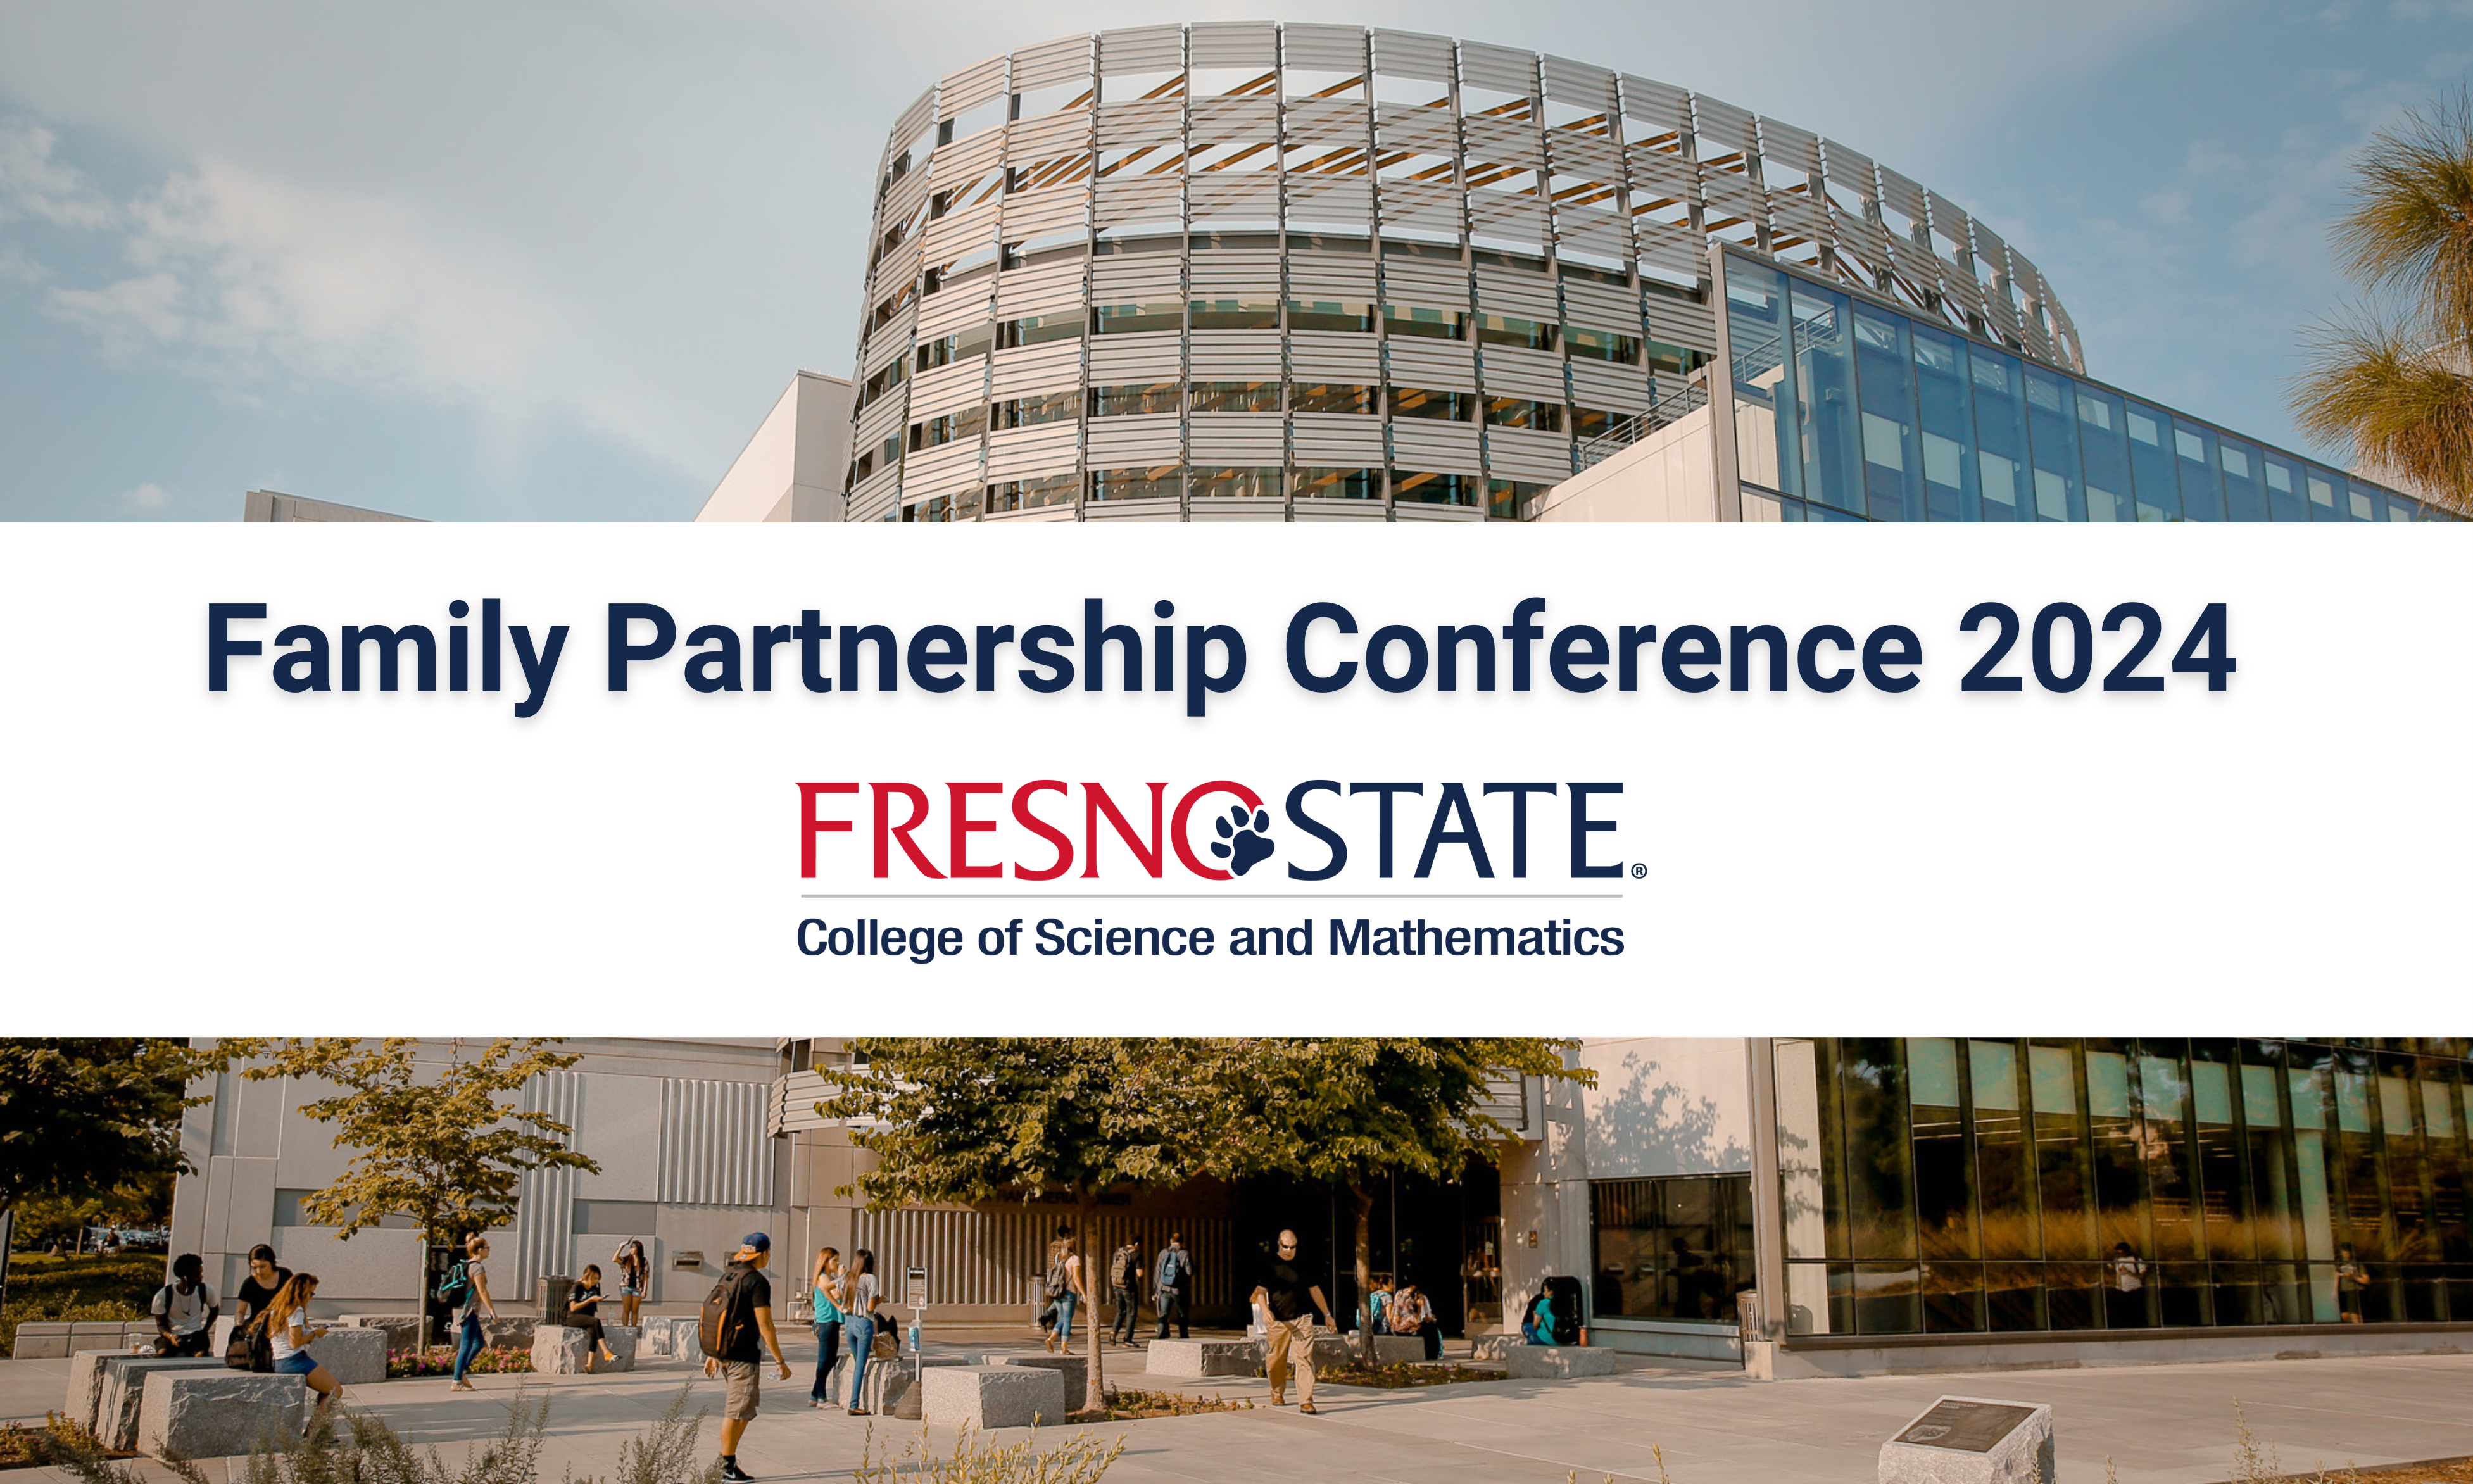 Family Partnership Conference 2024 in front of the fresno state library